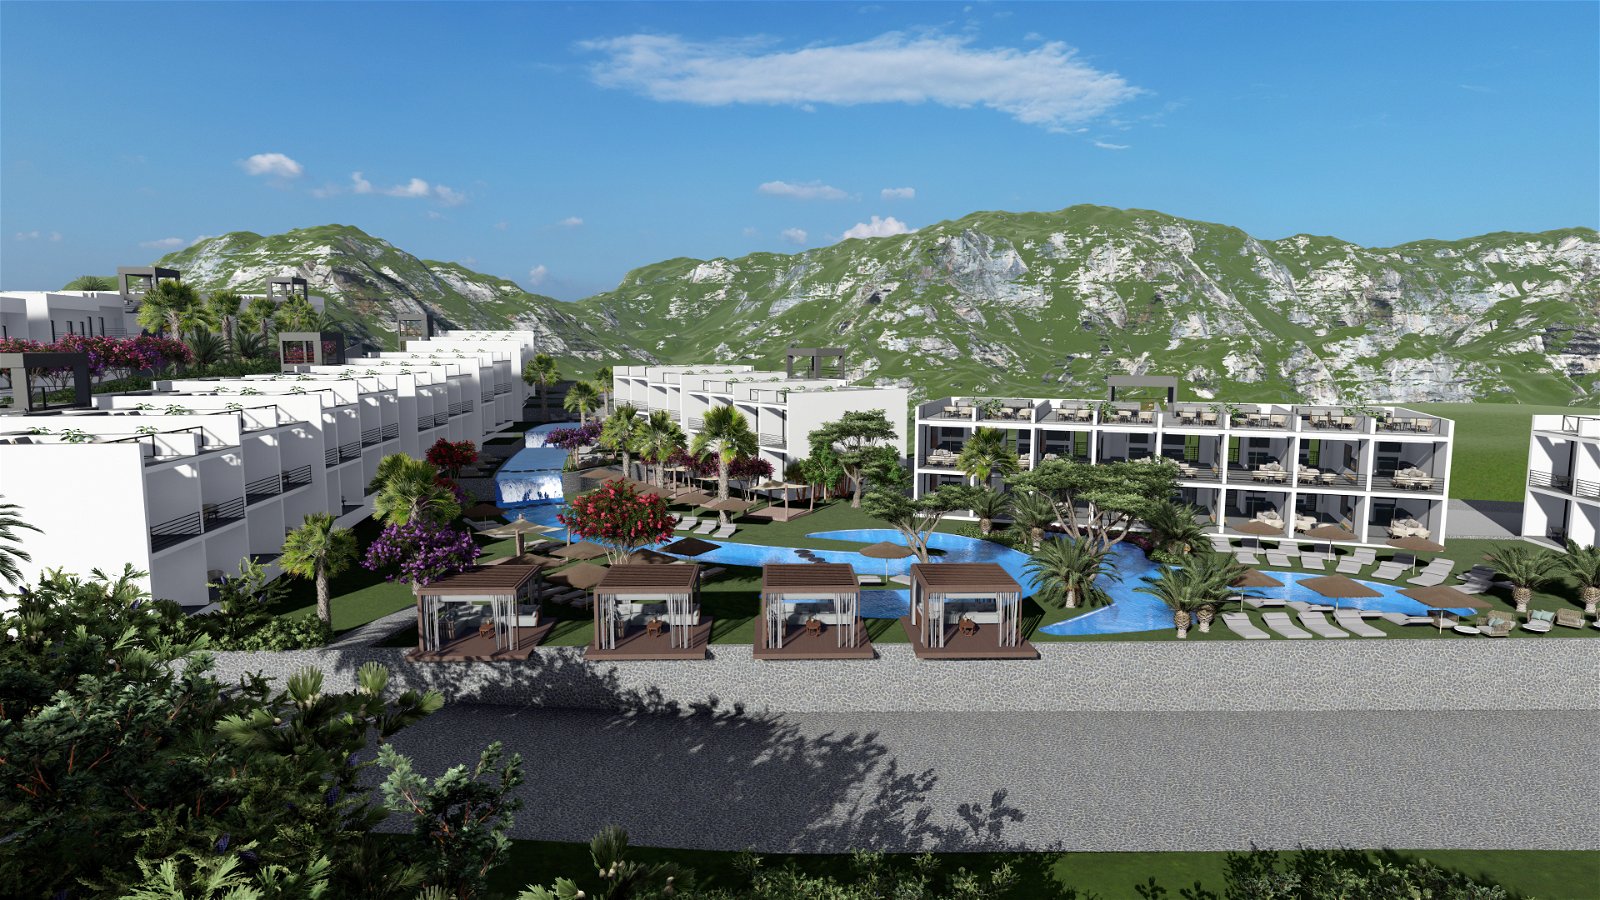 For Sale Apartments   Studio,  1+1 , 2+1  in Esentepe, Northern Cyprus-9e48aac9-2721-41e1-9c21-54999d6c13ae